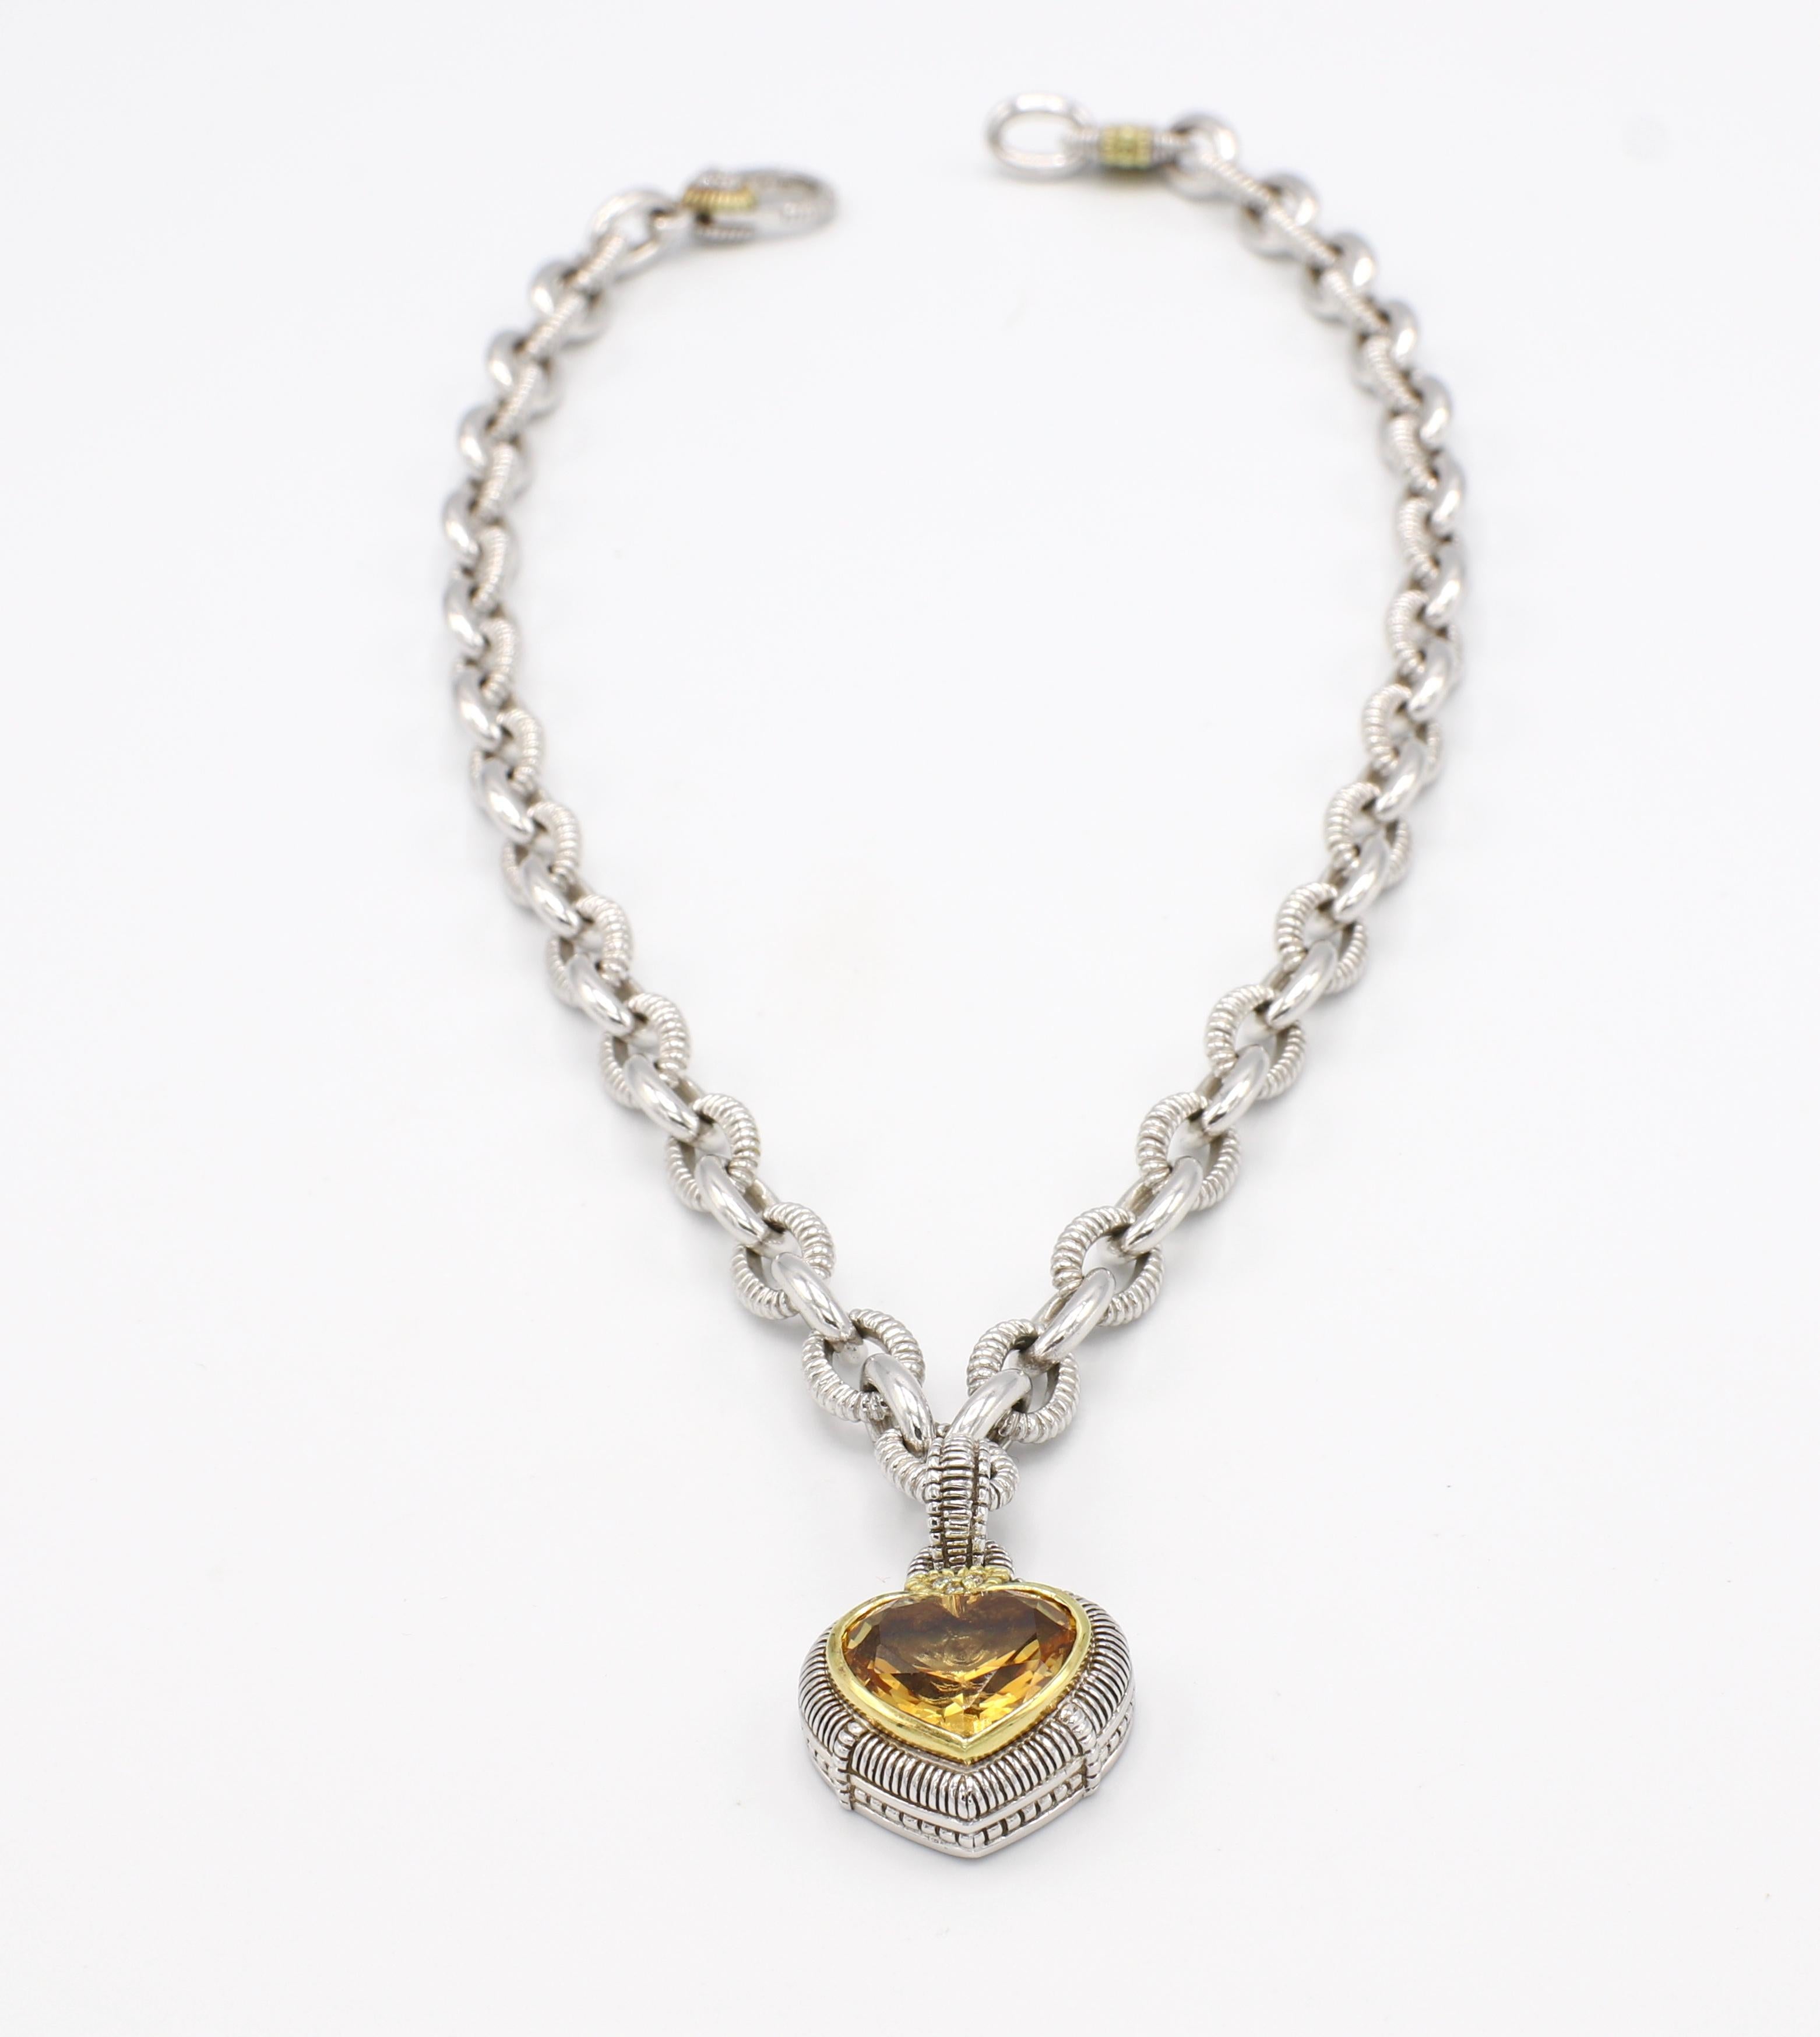 Judith Ripka Diamond & Citrine Sterling Silver & 18K Gold Heart Pendant Necklace

Metal: Sterling silver & 18k yellow gold
Weight: 68.1 grams
Diamonds: 6 round brilliant cut diamonds, approx. .06 CTW G VS
Chain length: 17.5 inches (18.75 with